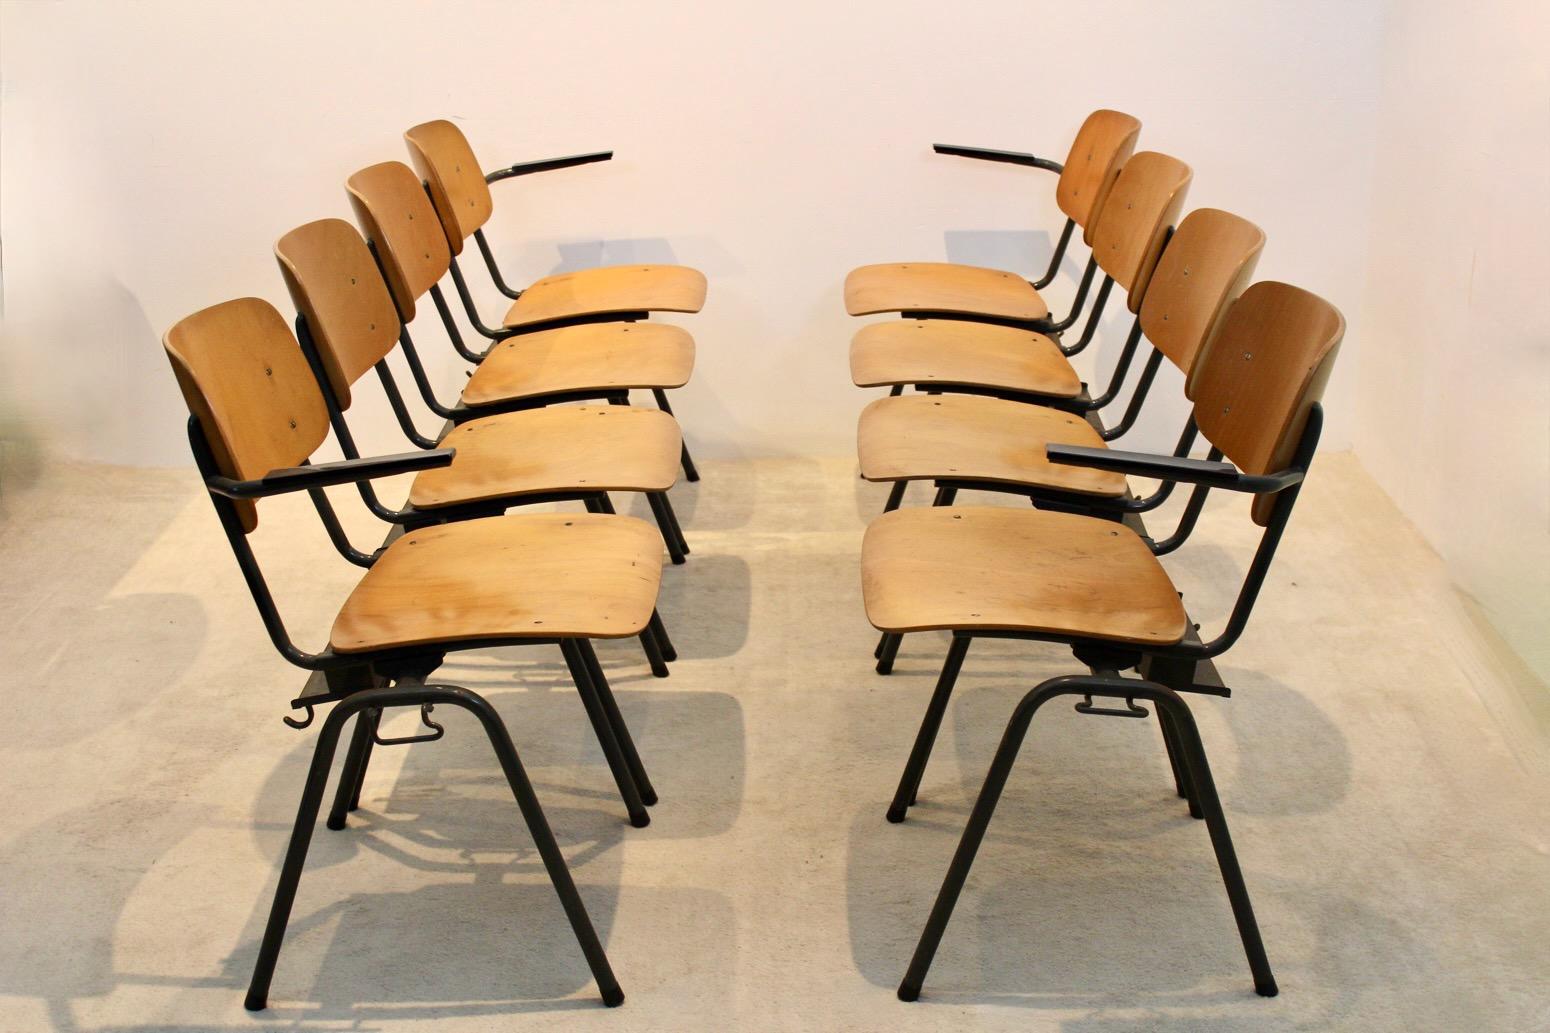 Unique and comfortable Industrial Plywood Schoolsofa seat consisting of 4 linked chairs, produced by Marko Holland in the ‘60’s. The chairs have a black tubular metal frame and beautifully curved plywood seat and backrests. Two chairs have an